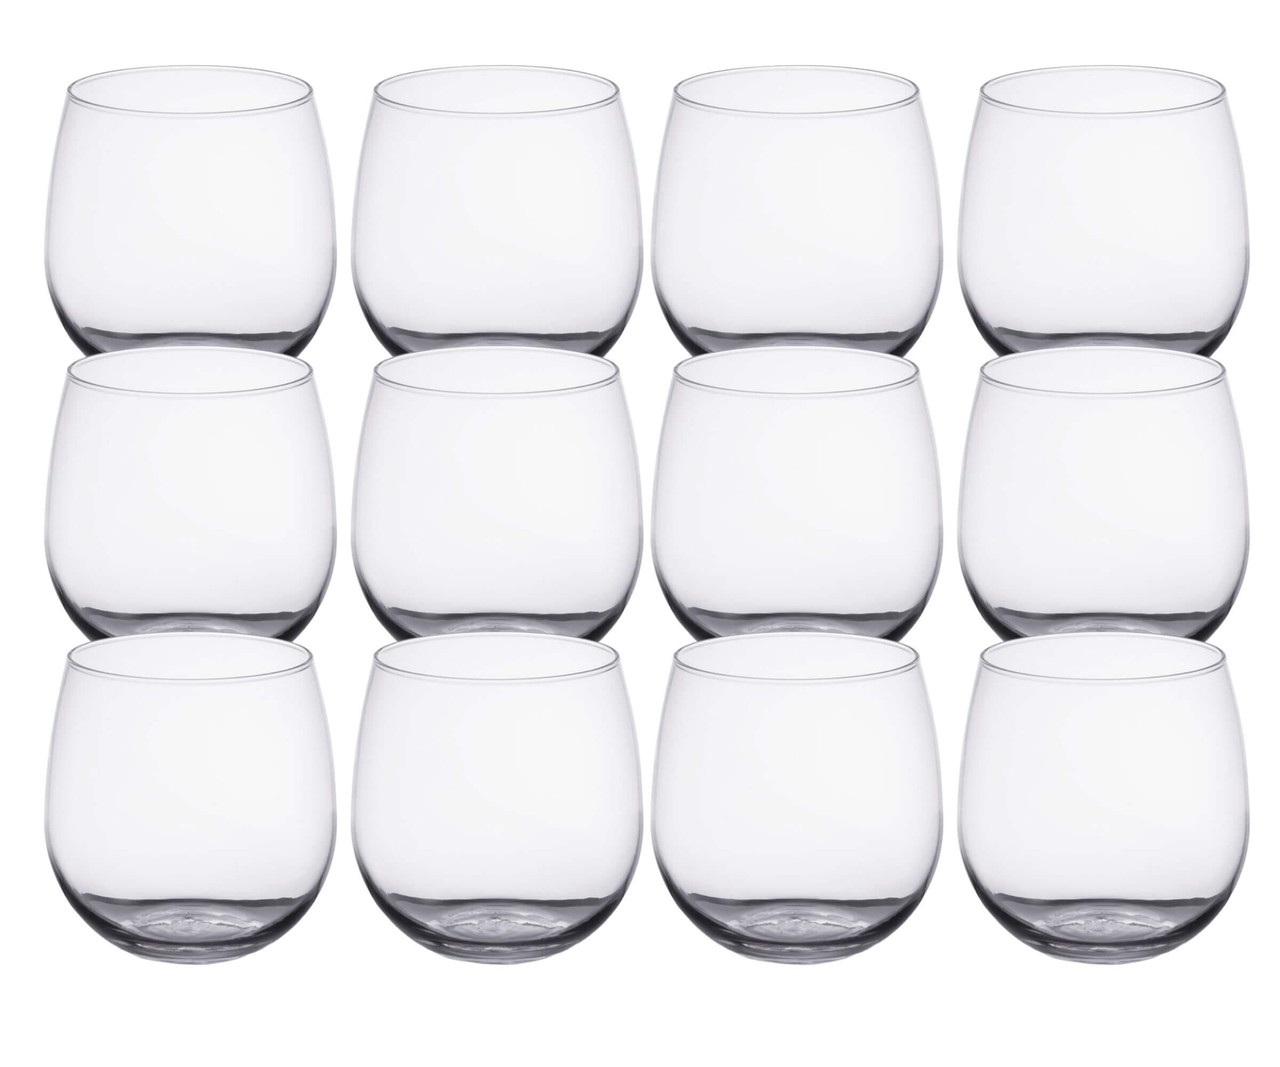 Libbey Case of 12 Contemporary Design 16.75 oz. Stemless Red Wine Glasses-Chicken Pieces